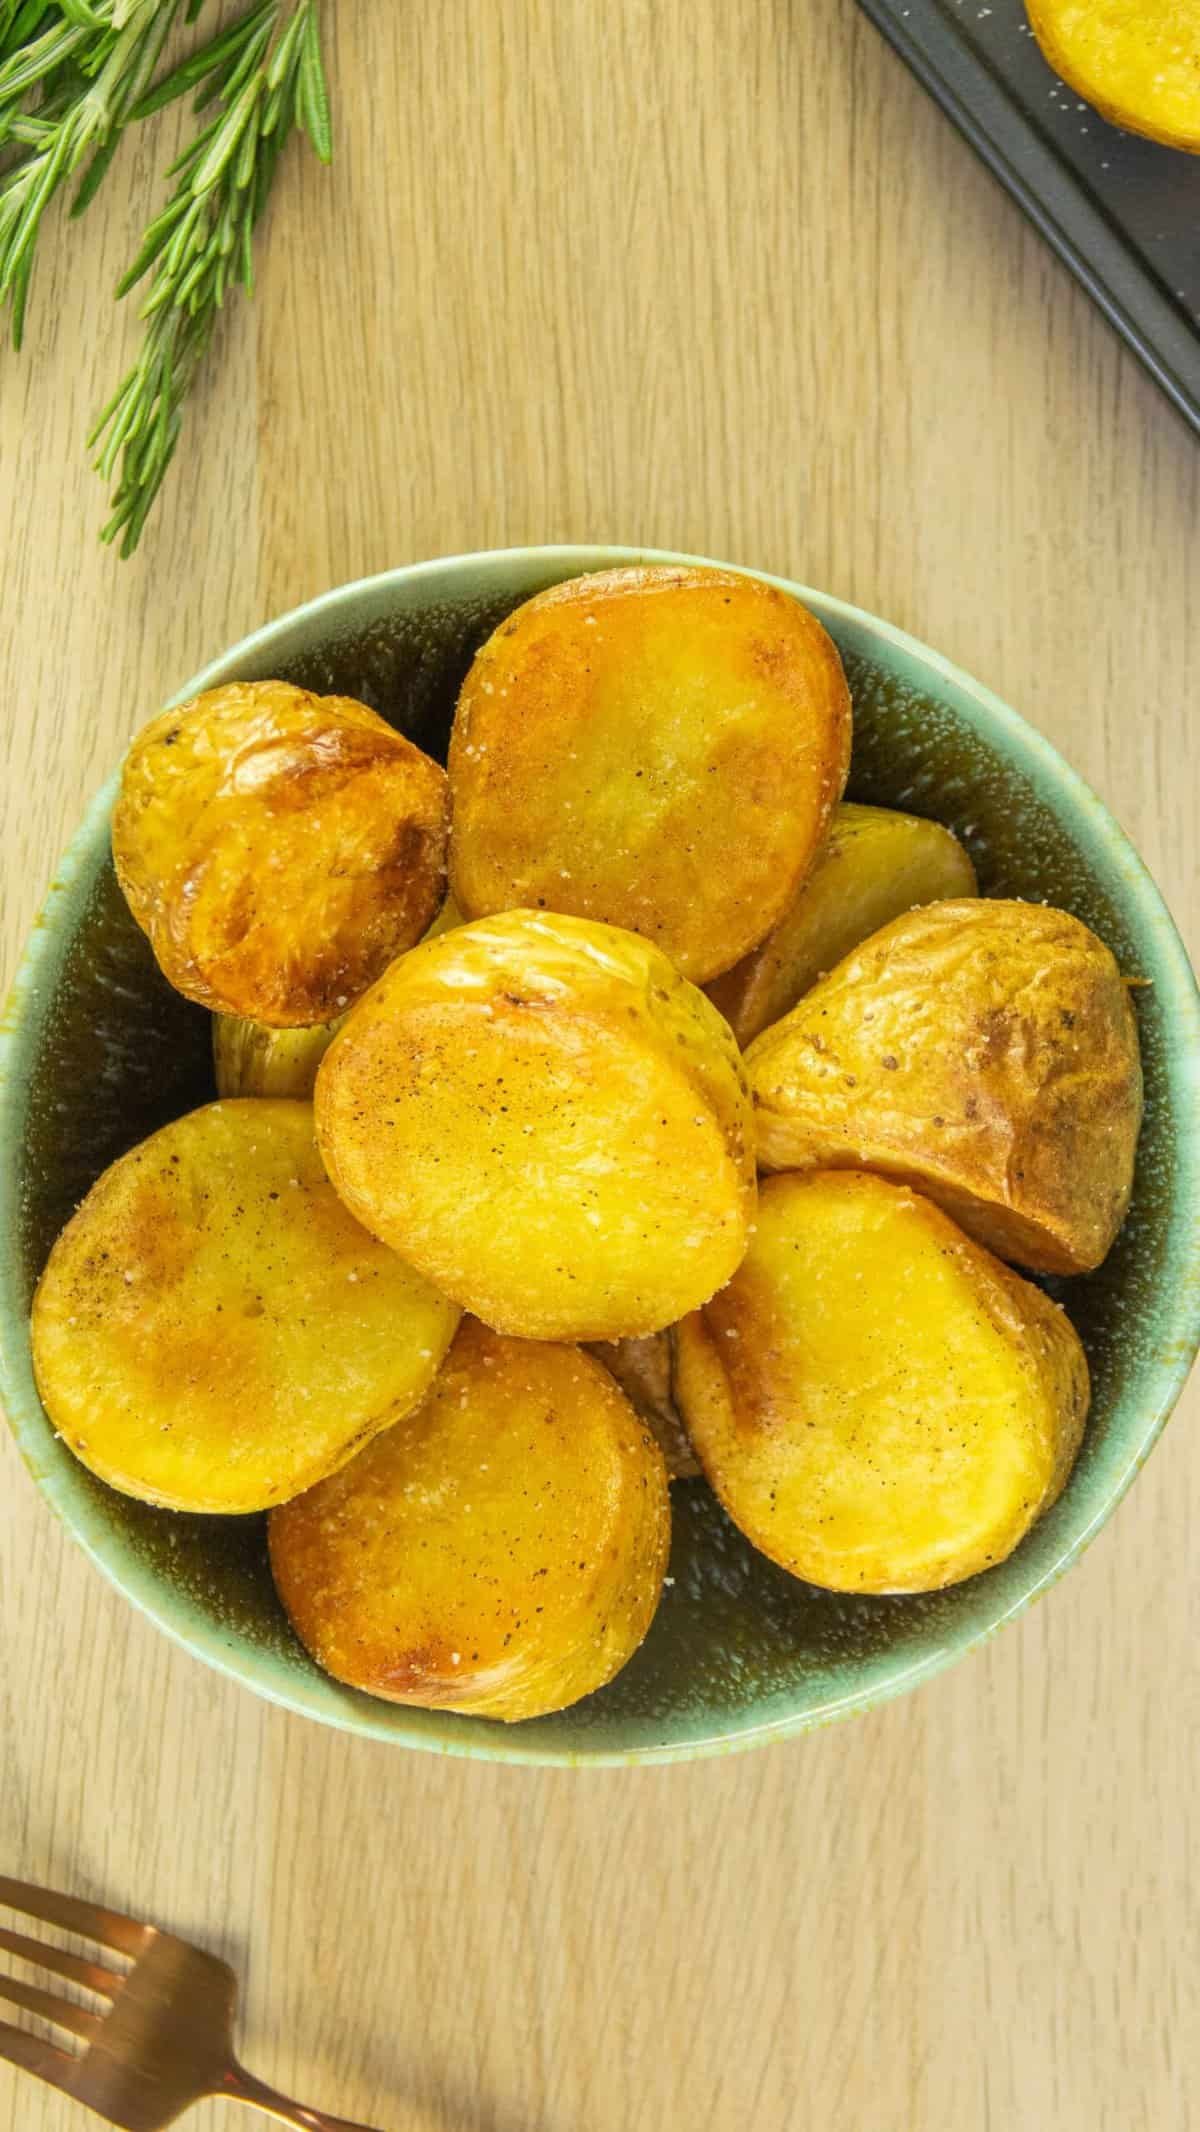 Bowl of roasted potato halves on a wooden background with a sprig of rosemary